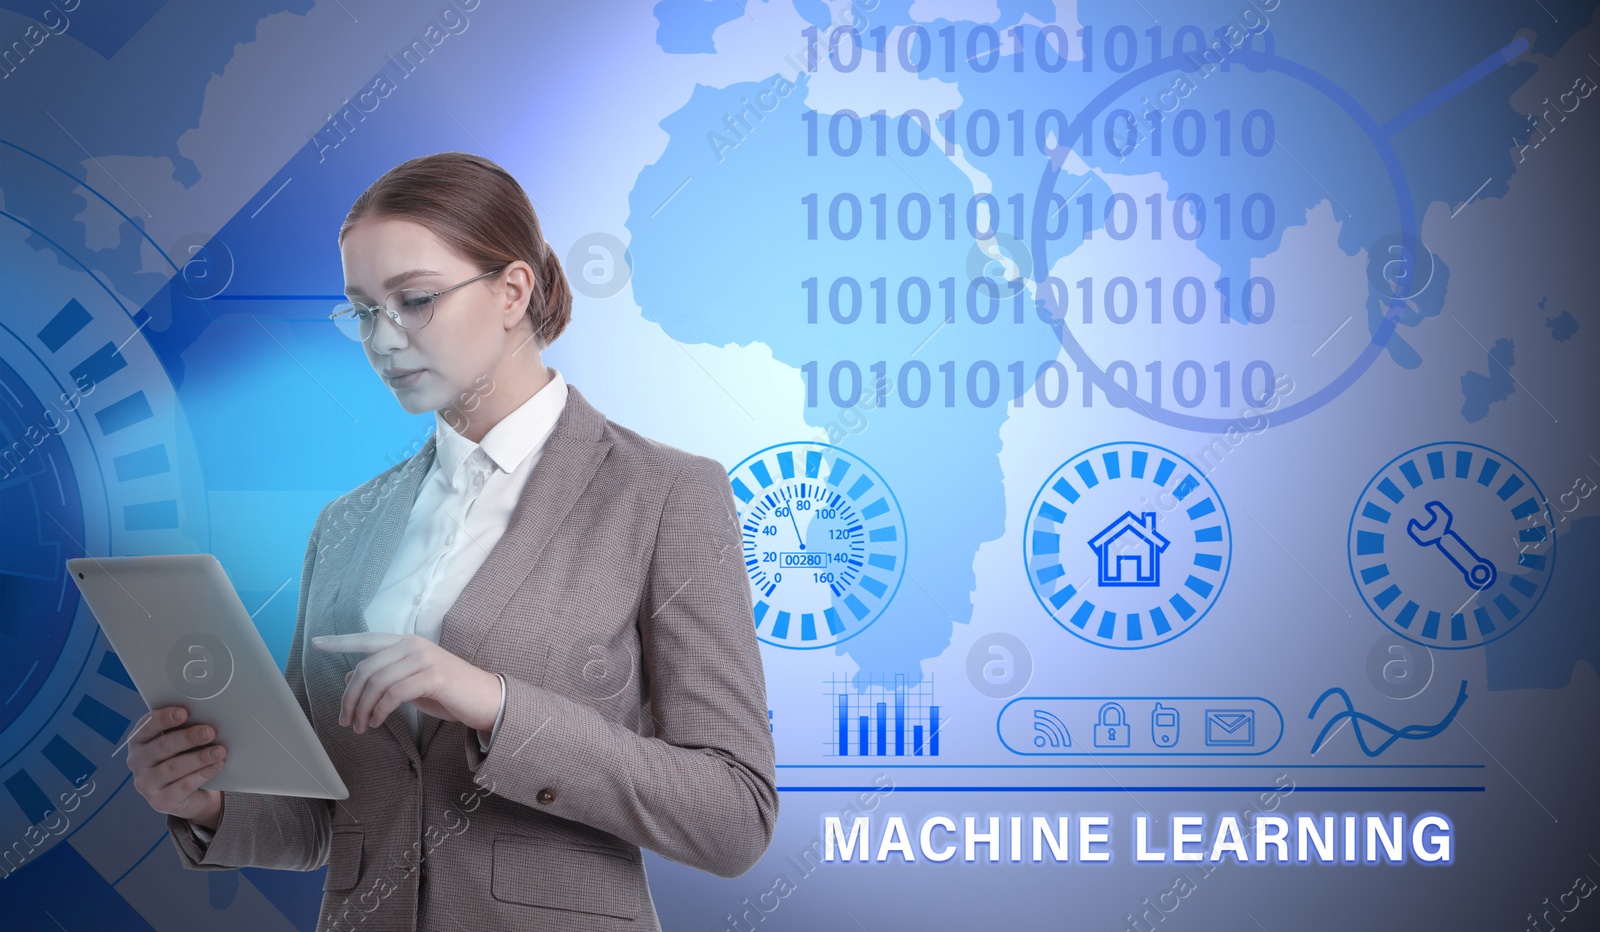 Image of Young woman using tablet and machine learning model on background